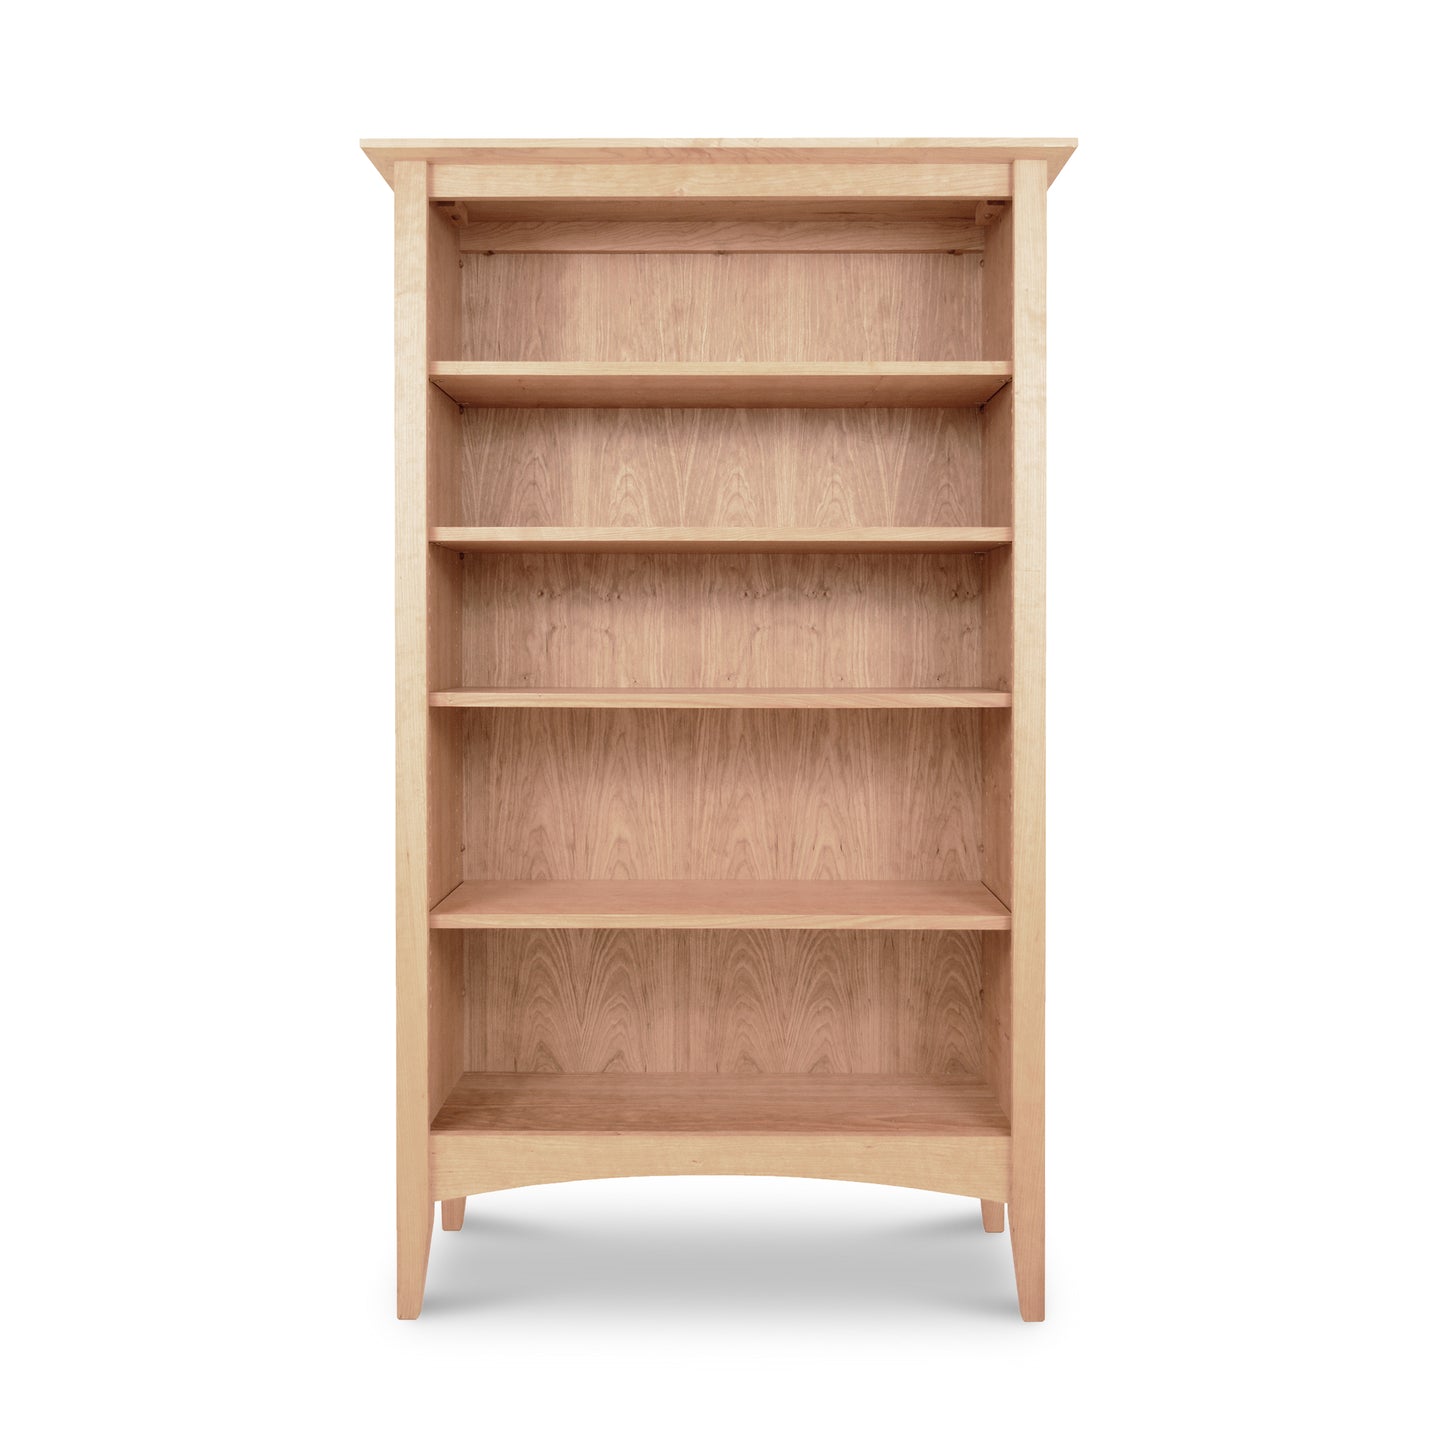 A sustainably harvested American Shaker Bookcase with four shelves, standing empty against a white background, made by Maple Corner Woodworks.